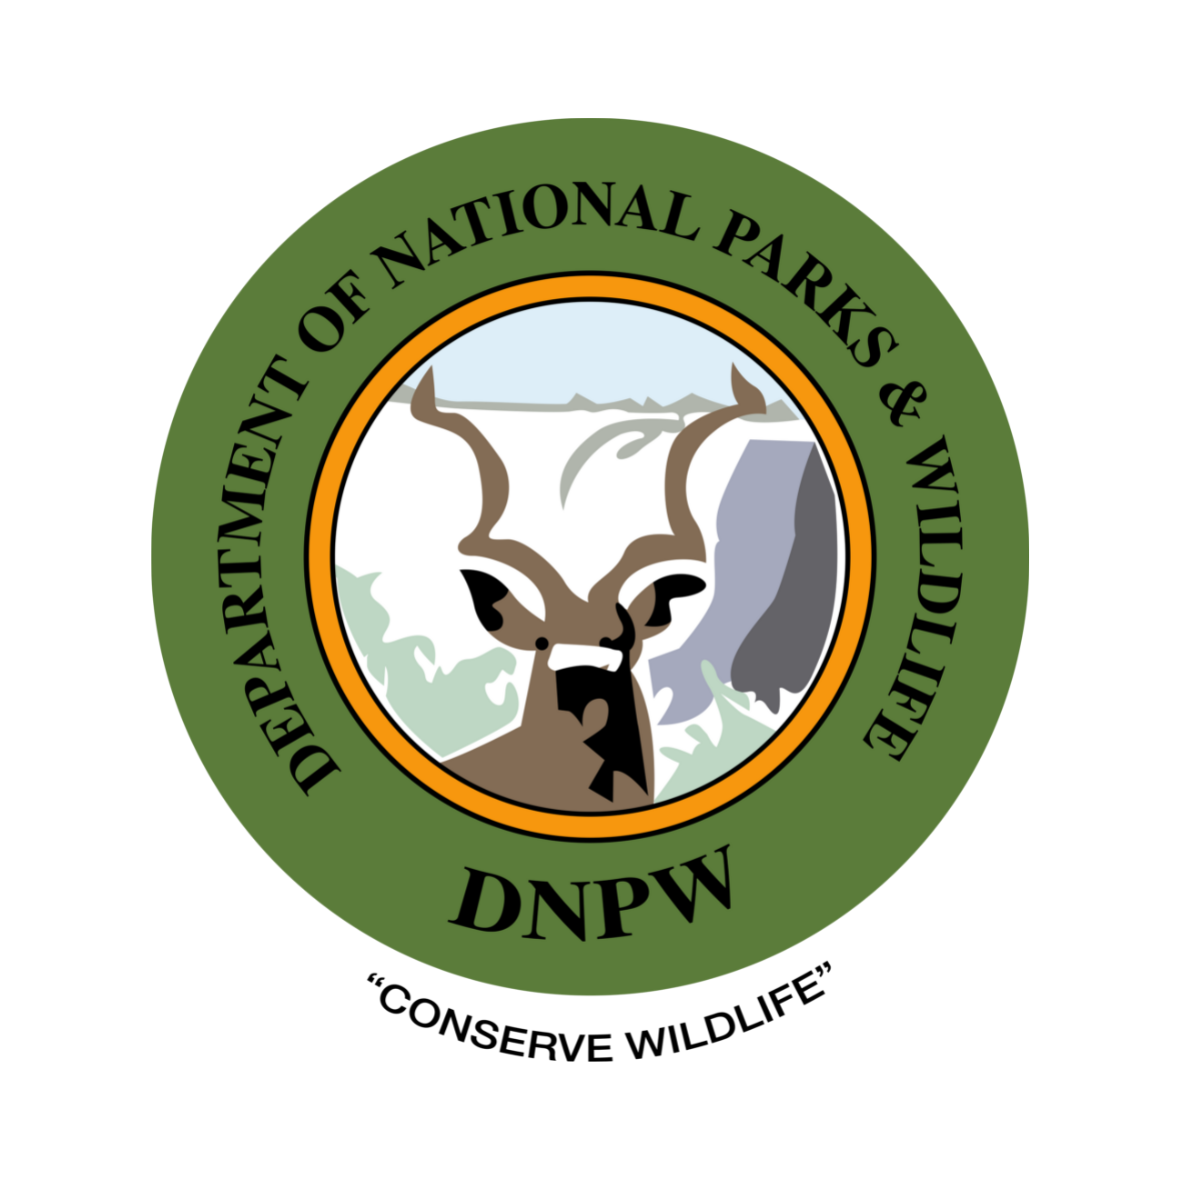 DNPW_square.png